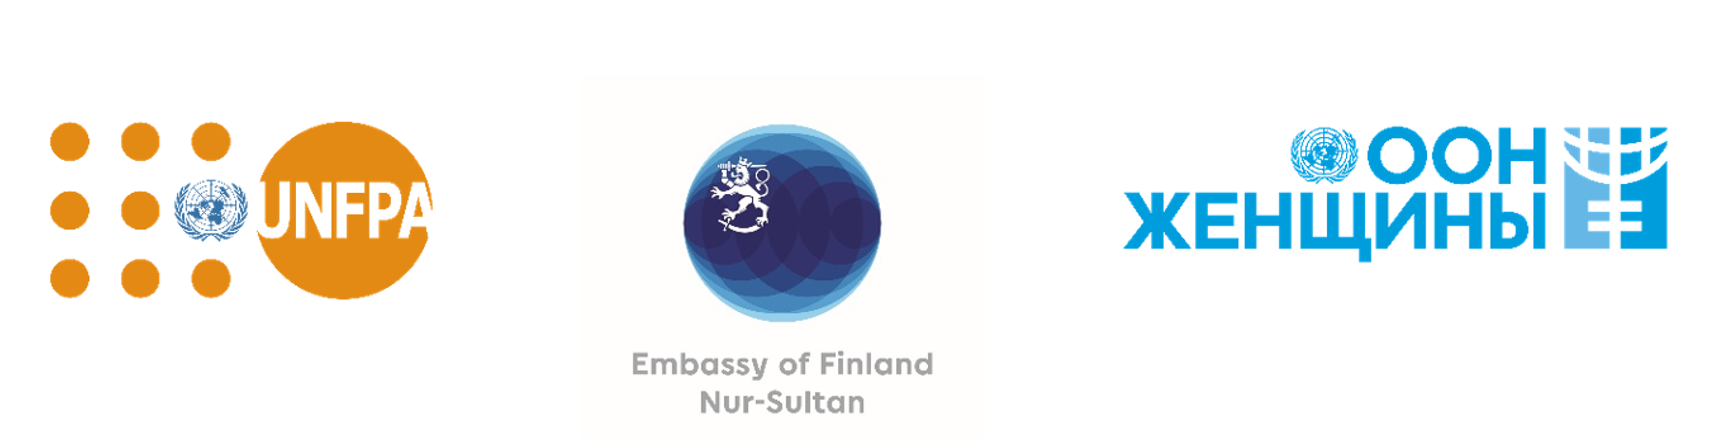 Logos of UNFPA, Embassy and UN Women